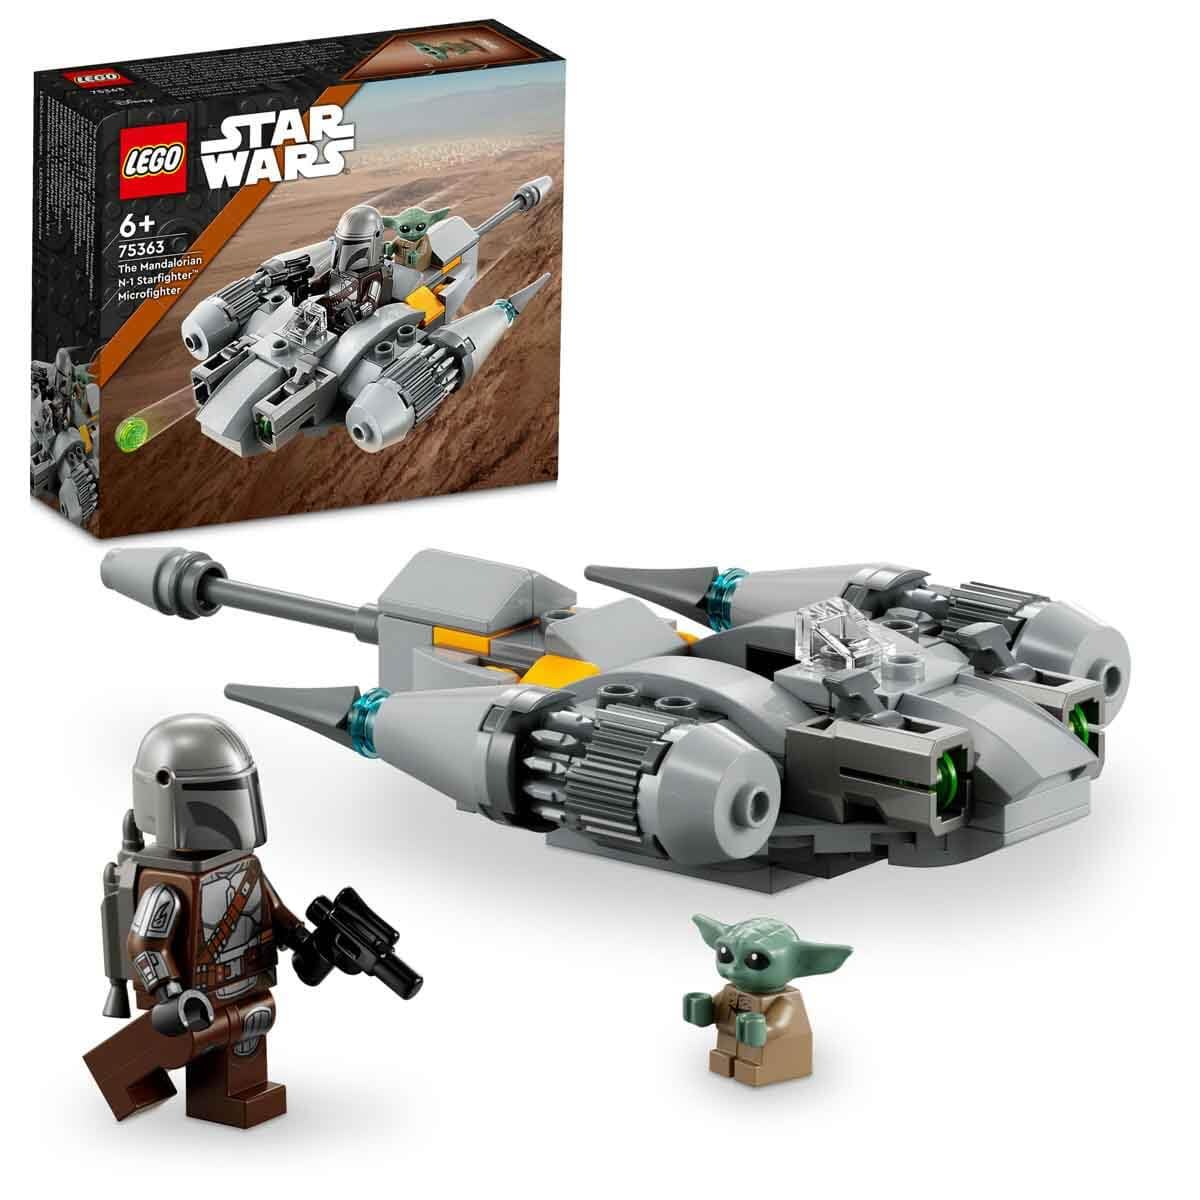 LEGO Star Wars The Mandalorian's N-1 Starfighter Microfighter Building Kit for Ages 6+